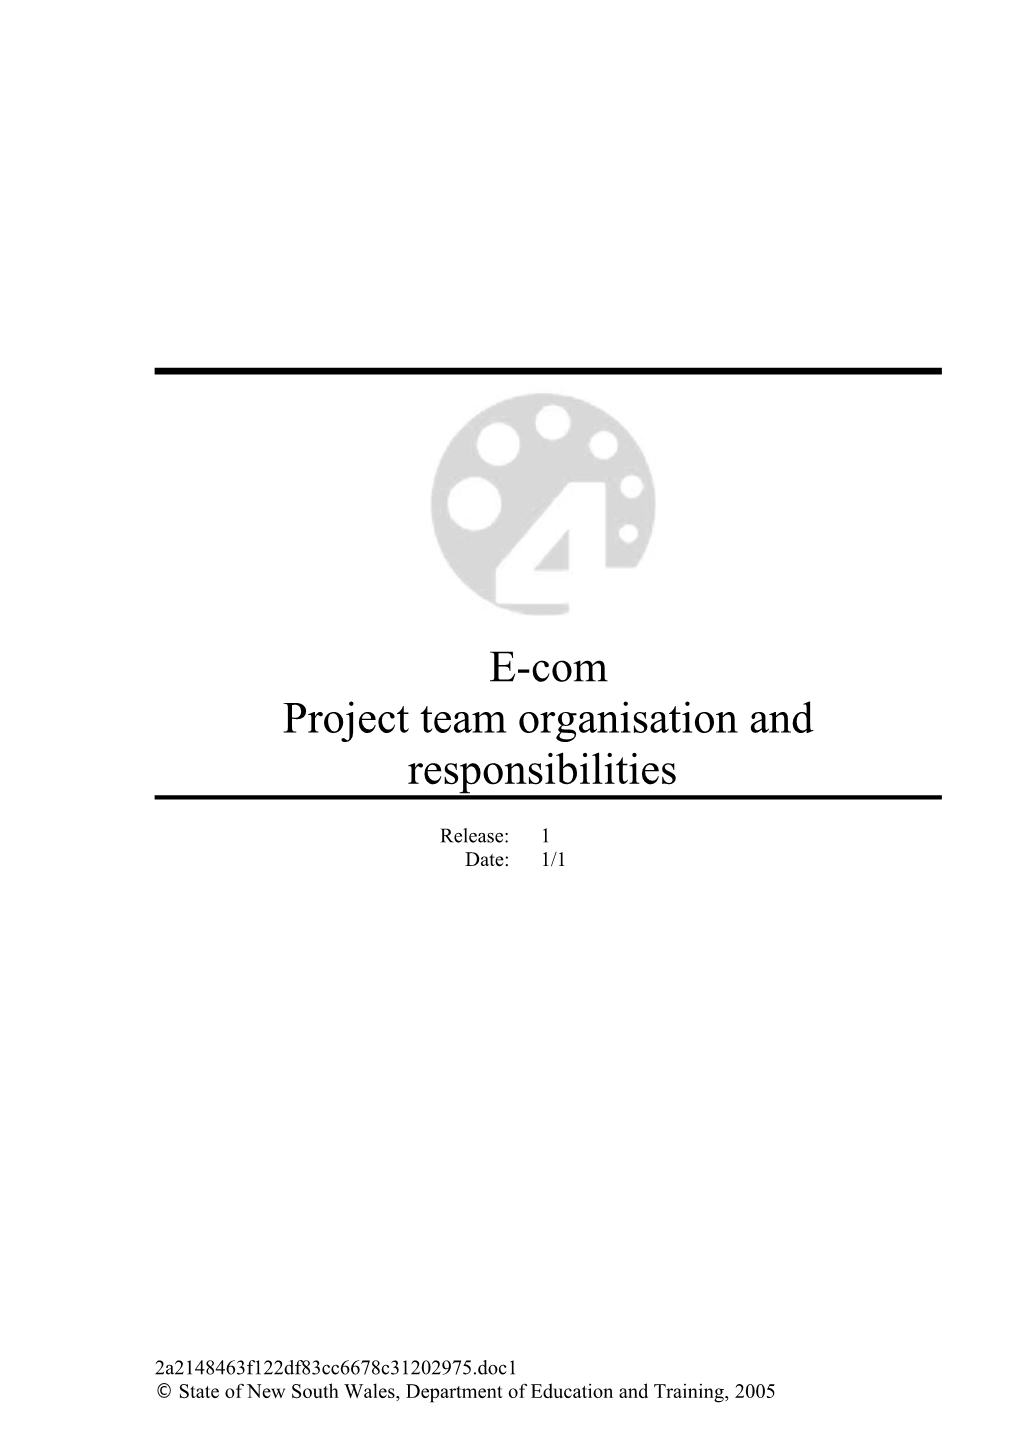 Project Team Organisation and Responsibilities